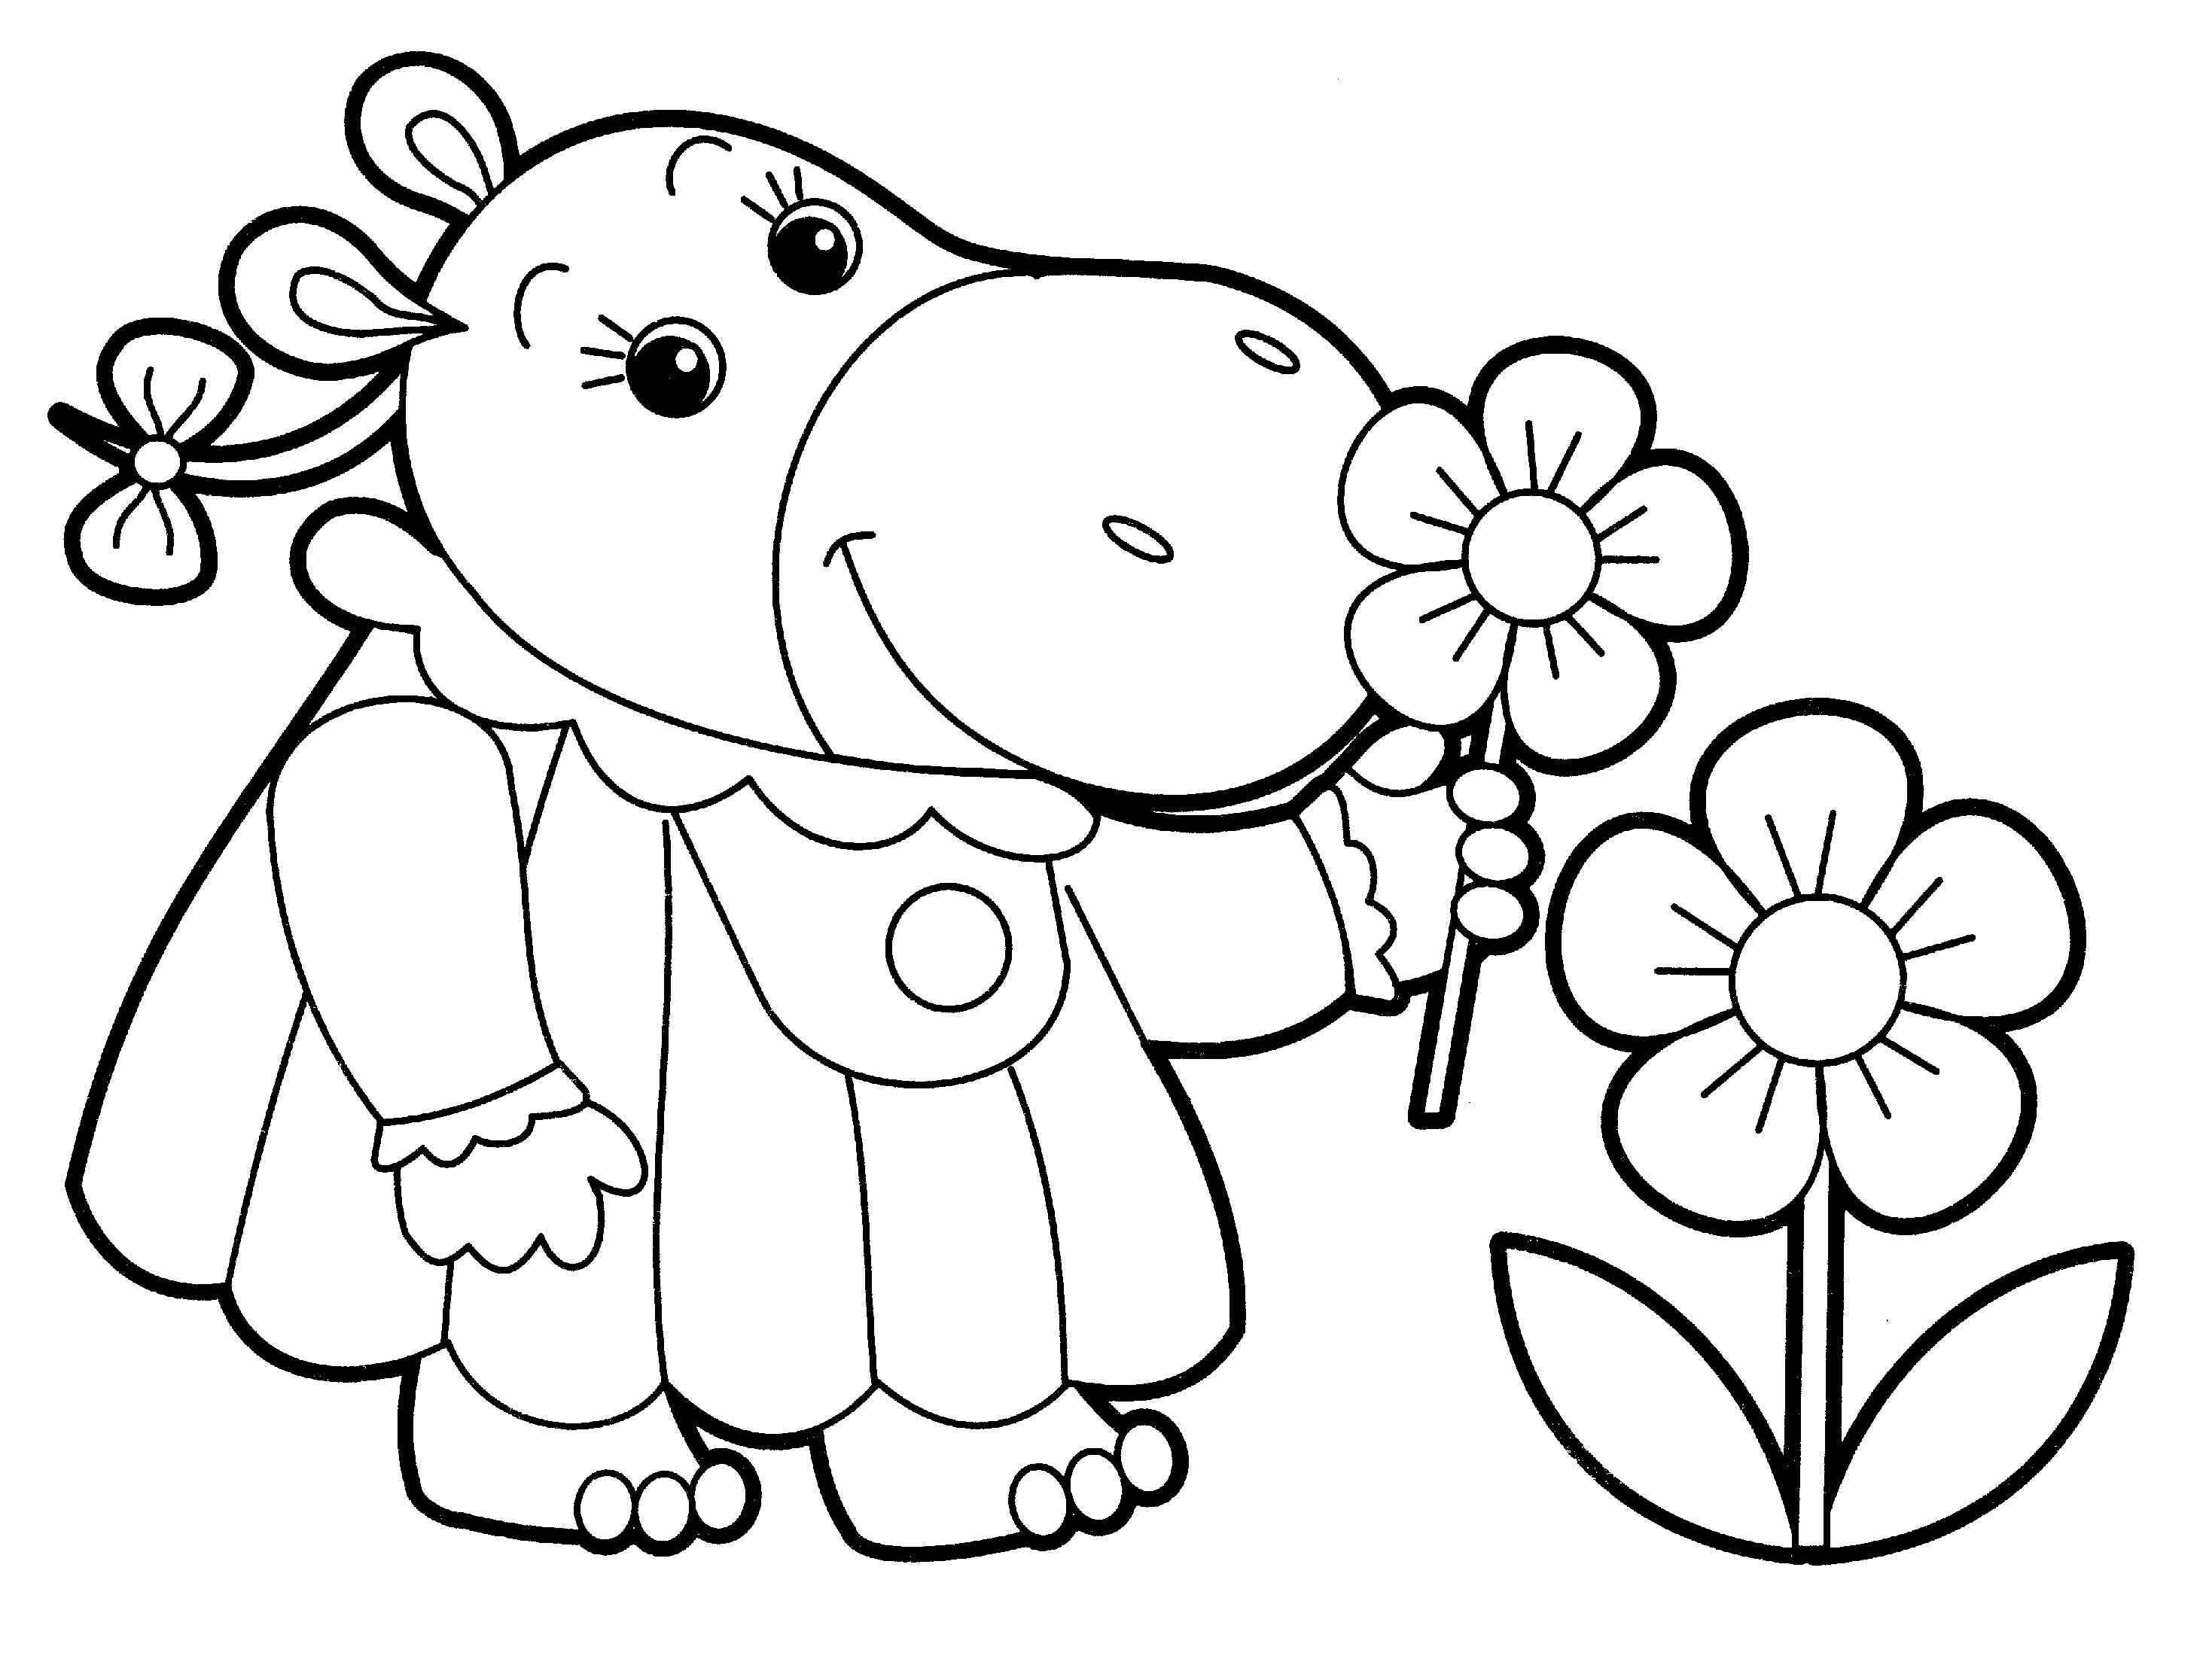 Animal Coloring Book For Kids
 Animal Coloring Pages for Adults Bestofcoloring